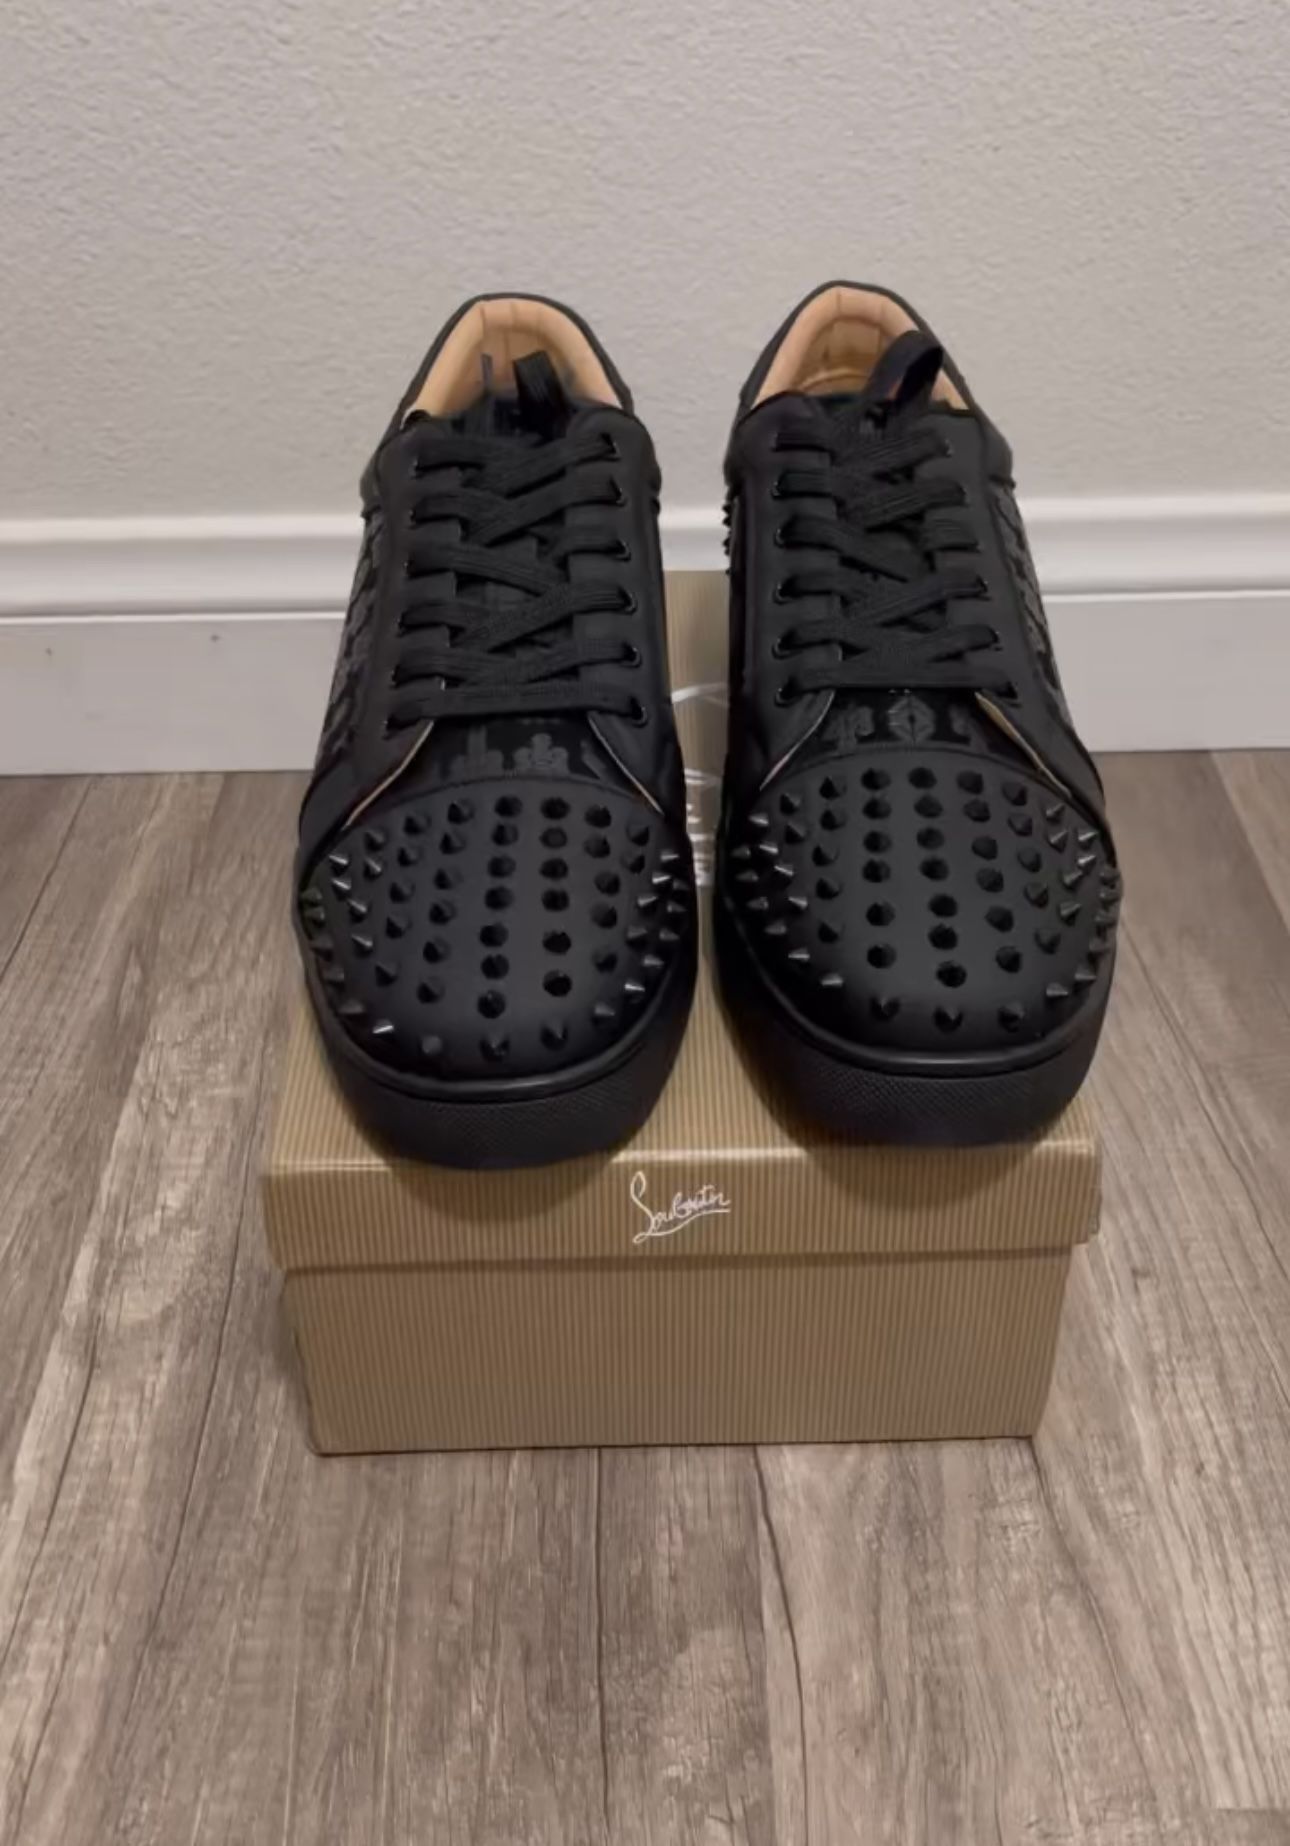 Christian Louboutin Mens Shoes for Sale in Pomona, CA - OfferUp